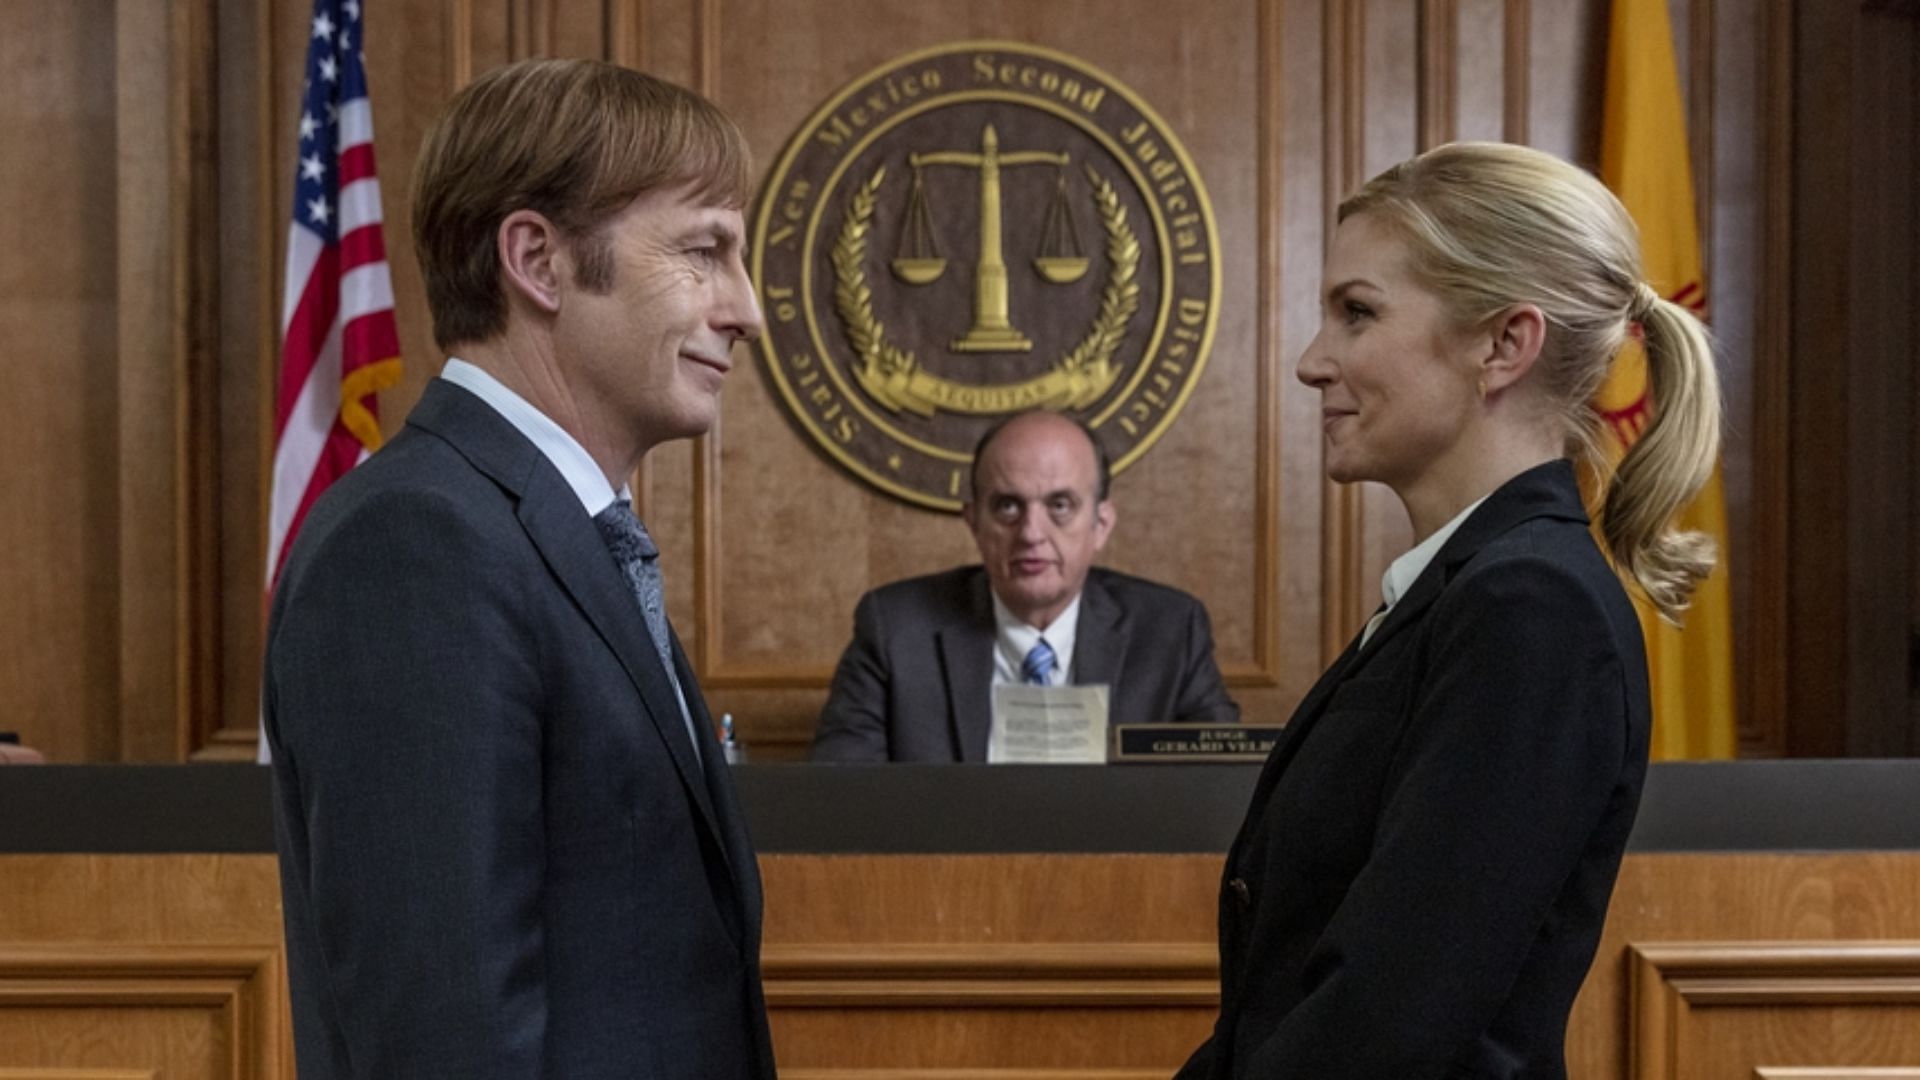 Saul Goodman and Kim Wexler getting married (Image via Greg Lewis/AMC/Sony Pictures Television)